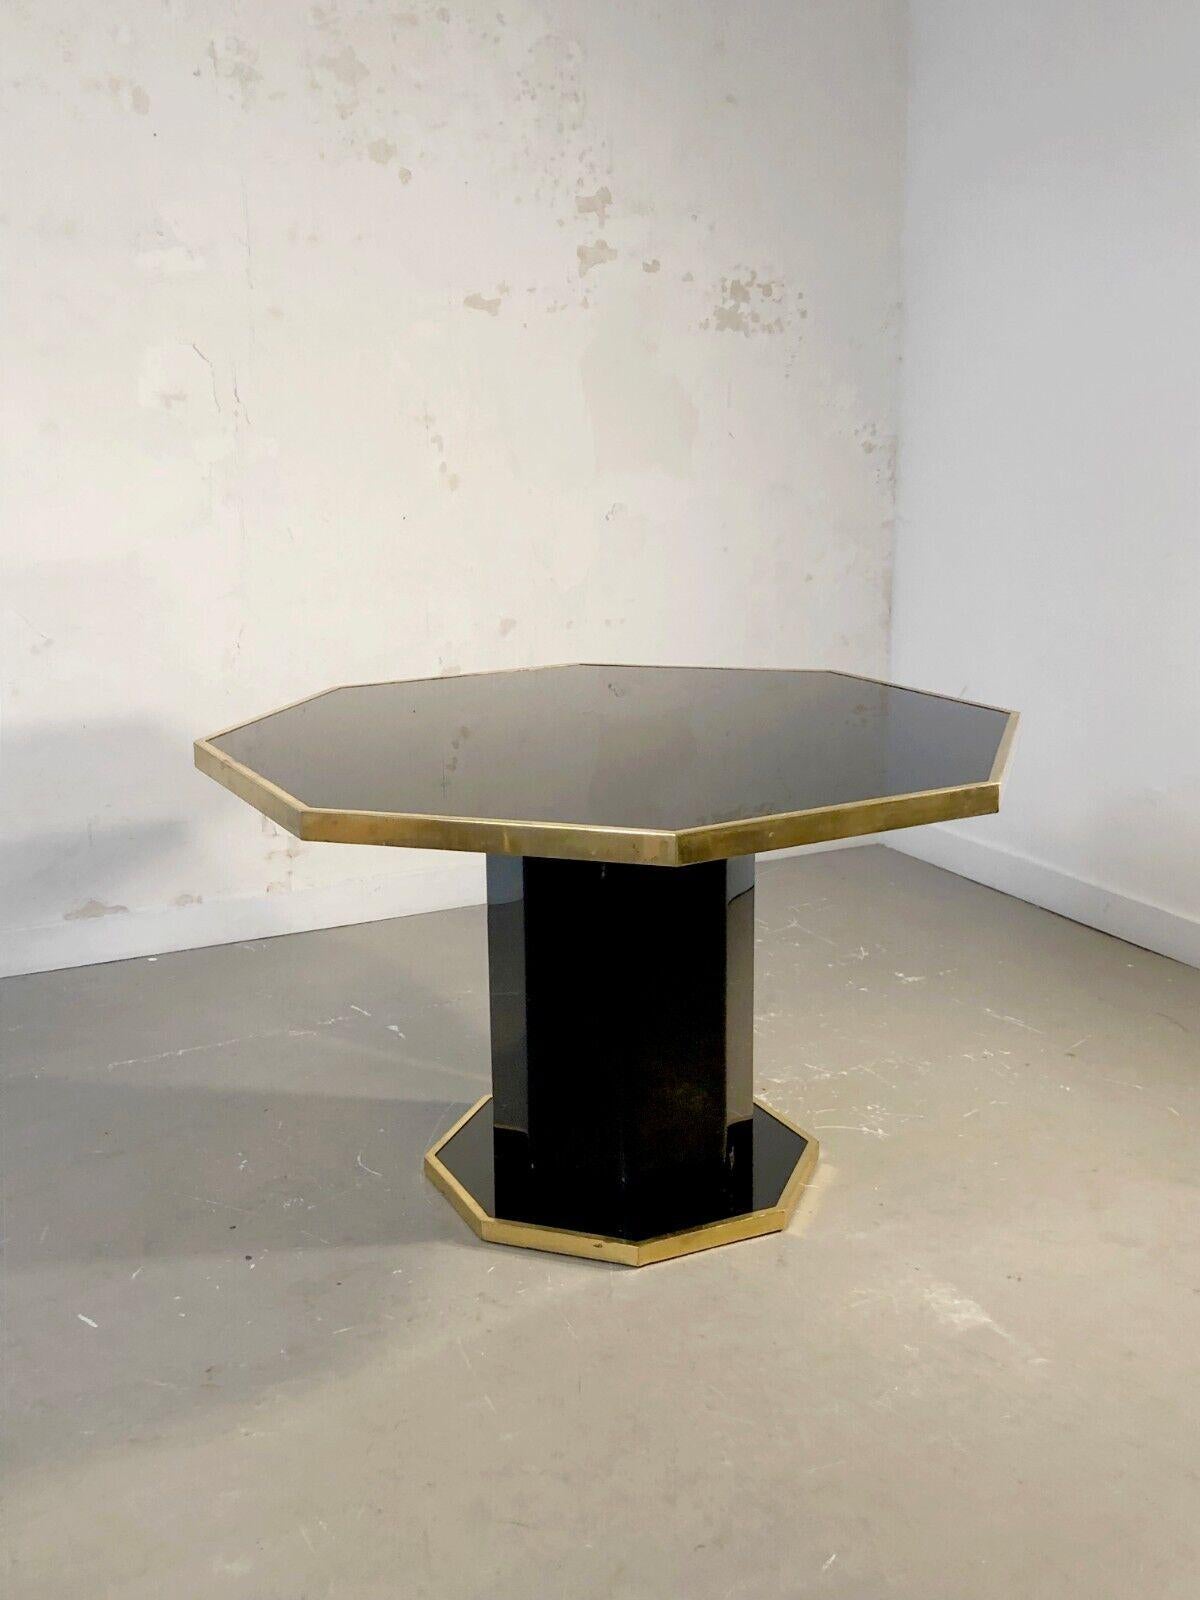 Lacquered A SHABBY-CHIC NEO-CLASSICAL Octogonal DINING TABLE by ERIC MAVILLE, France, 1970 For Sale